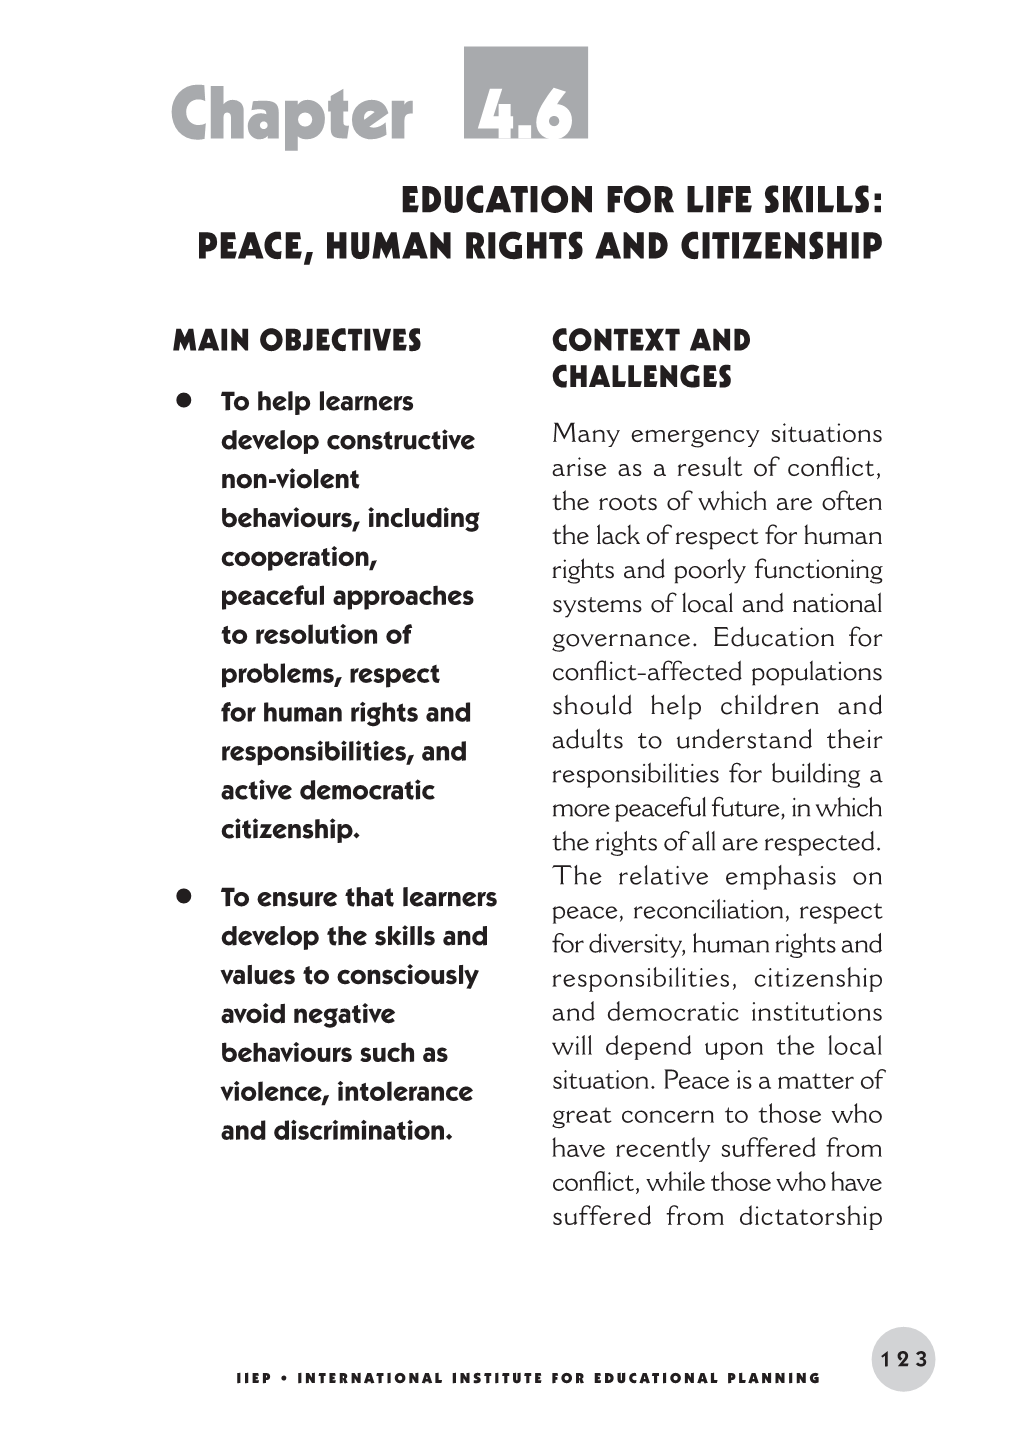 4.6 Education for Life Skills: Peace, Human Rights and Citizenship